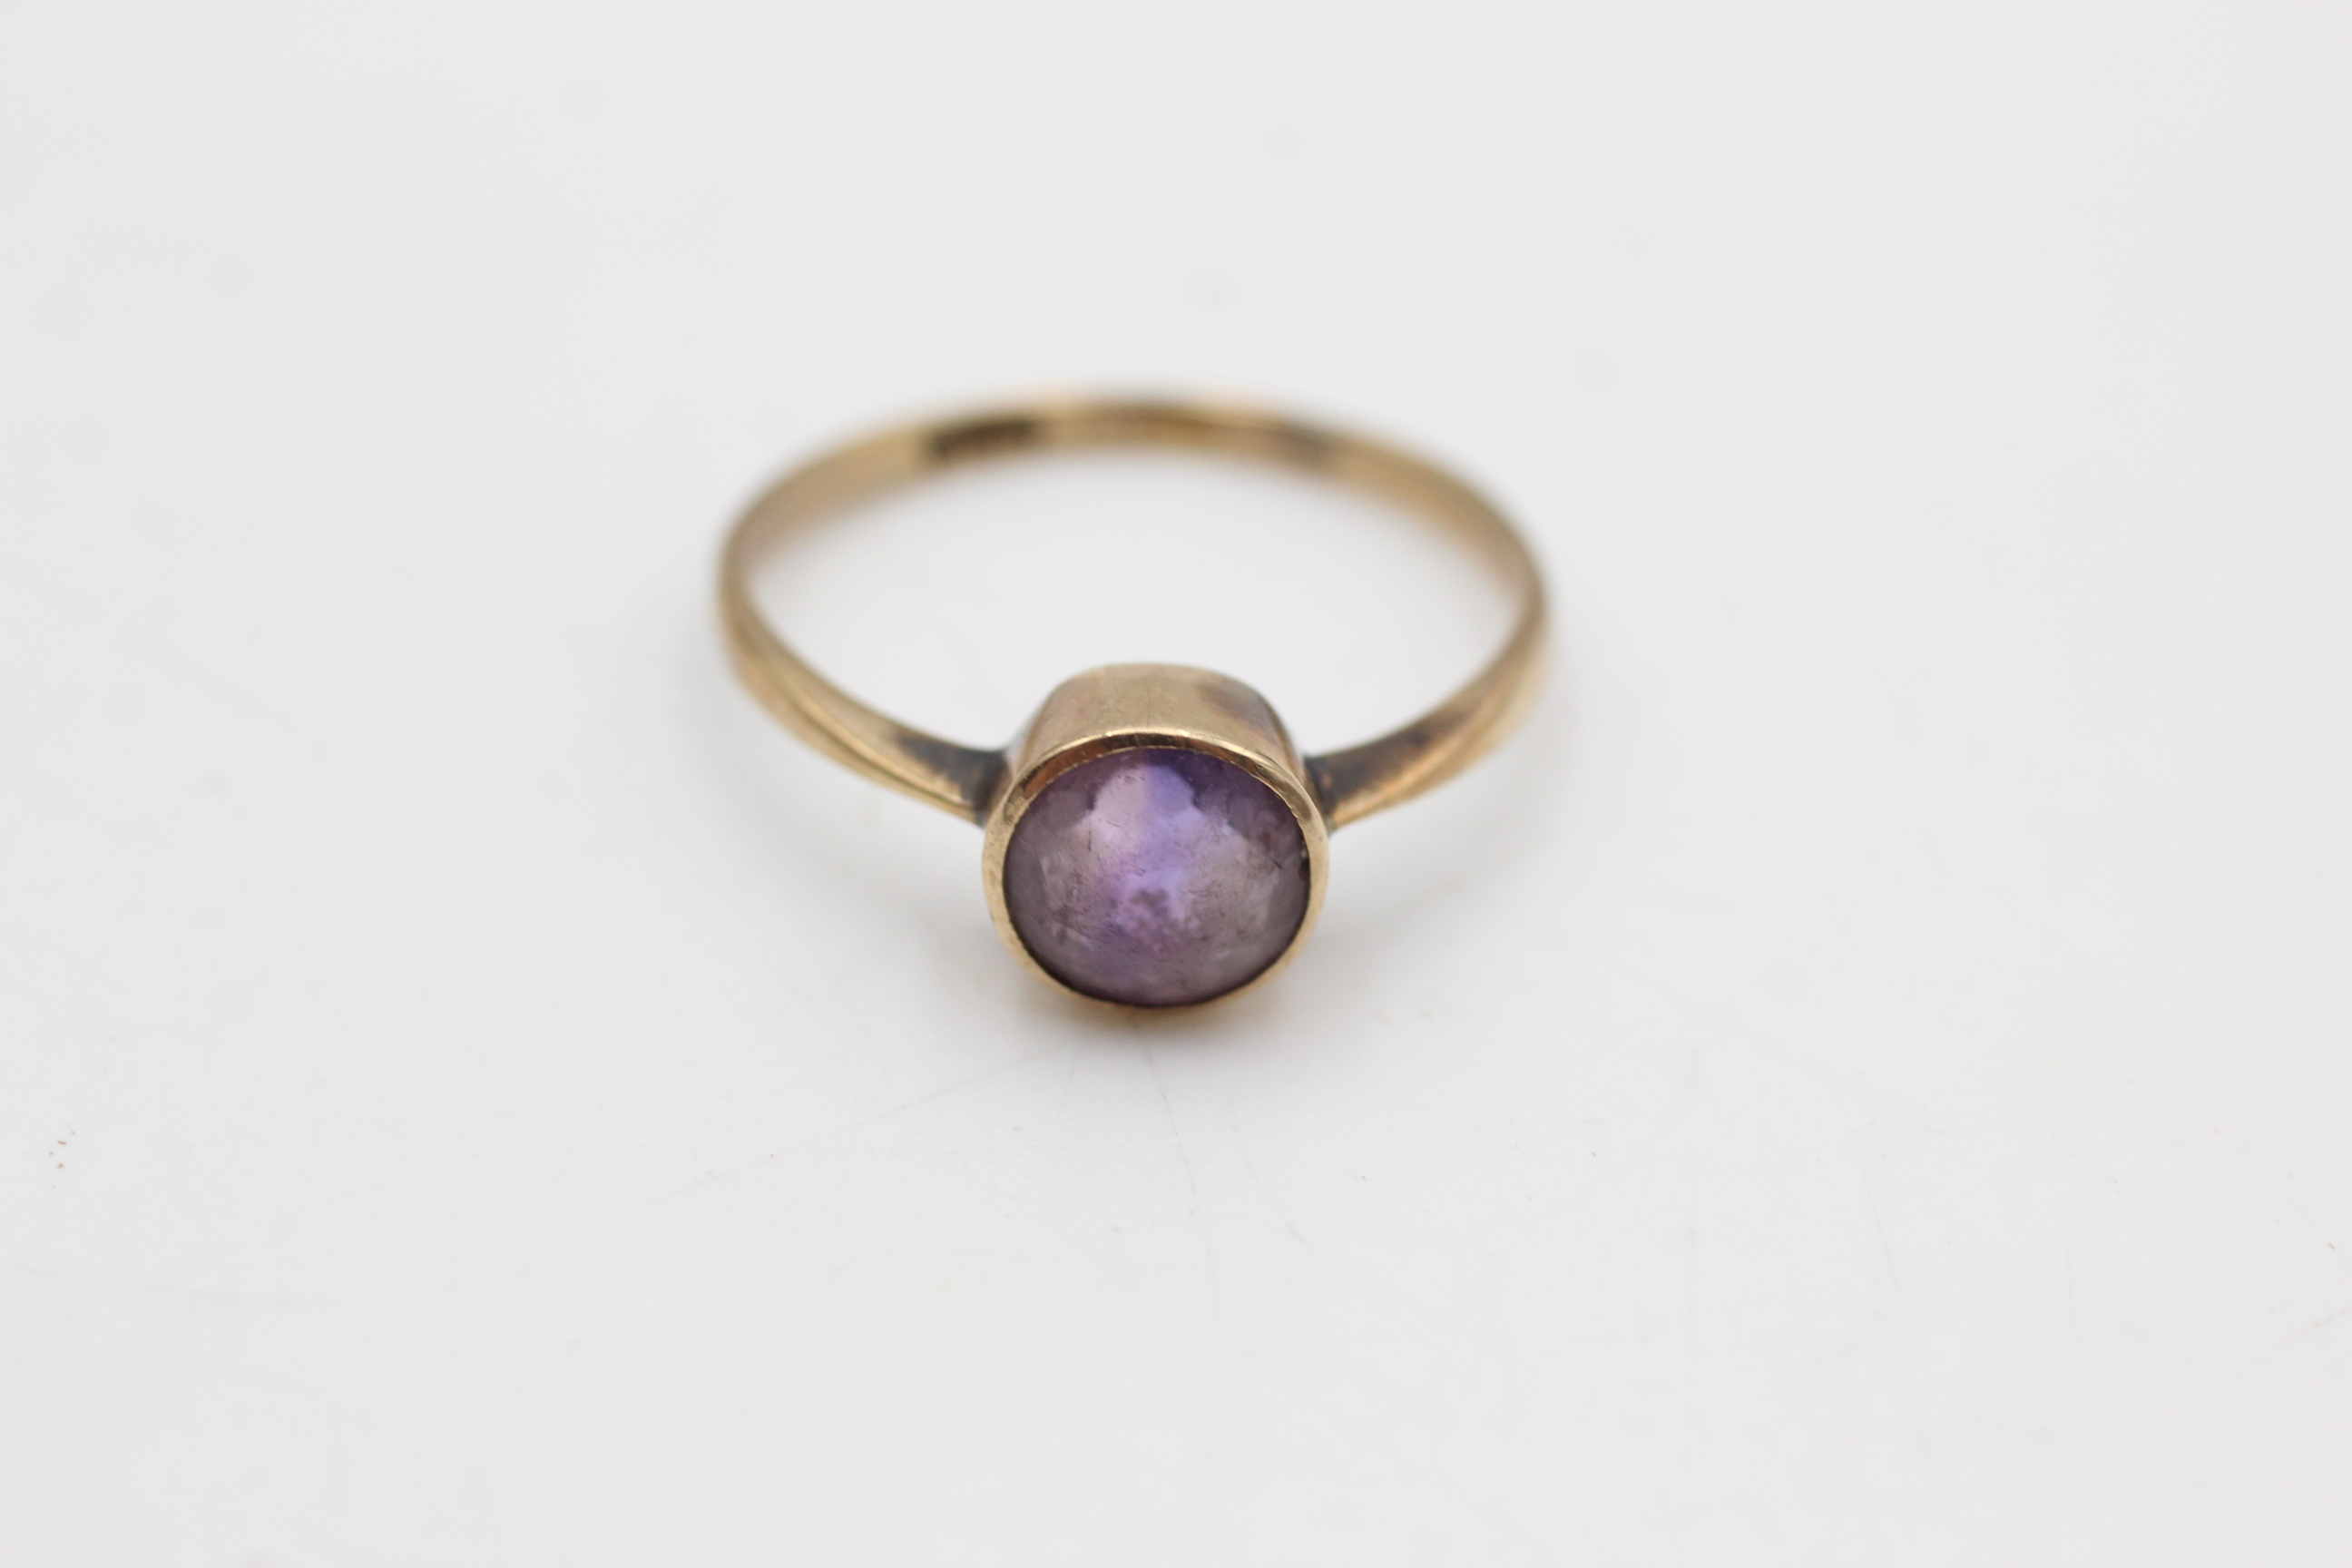 9ct gold antique amethyst ring (1.8g)